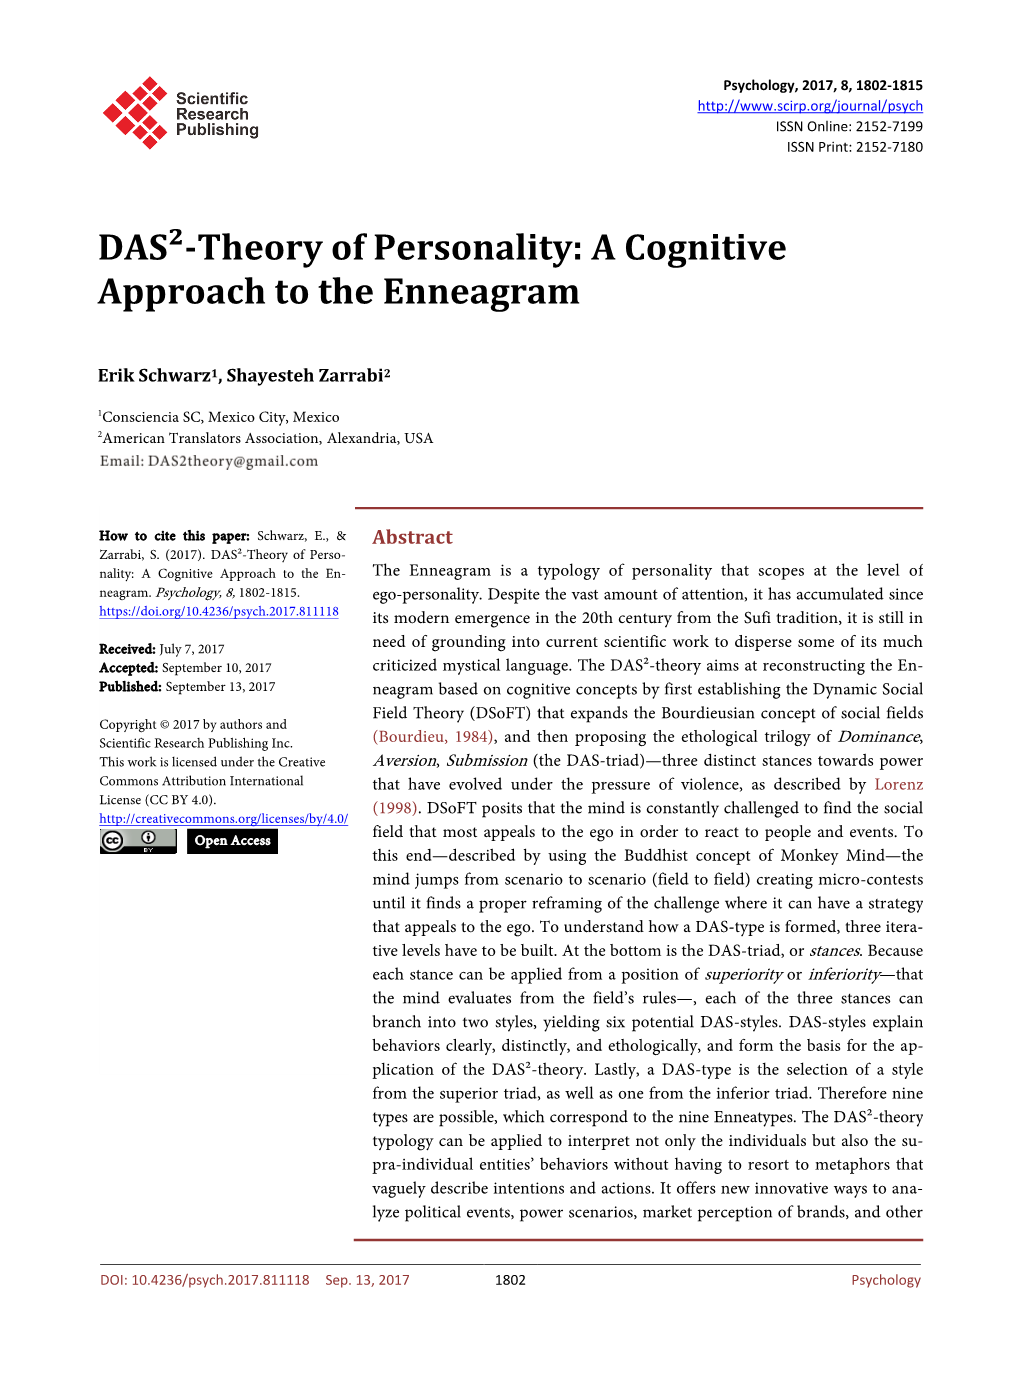 DAS²-Theory of Personality: a Cognitive Approach to the Enneagram